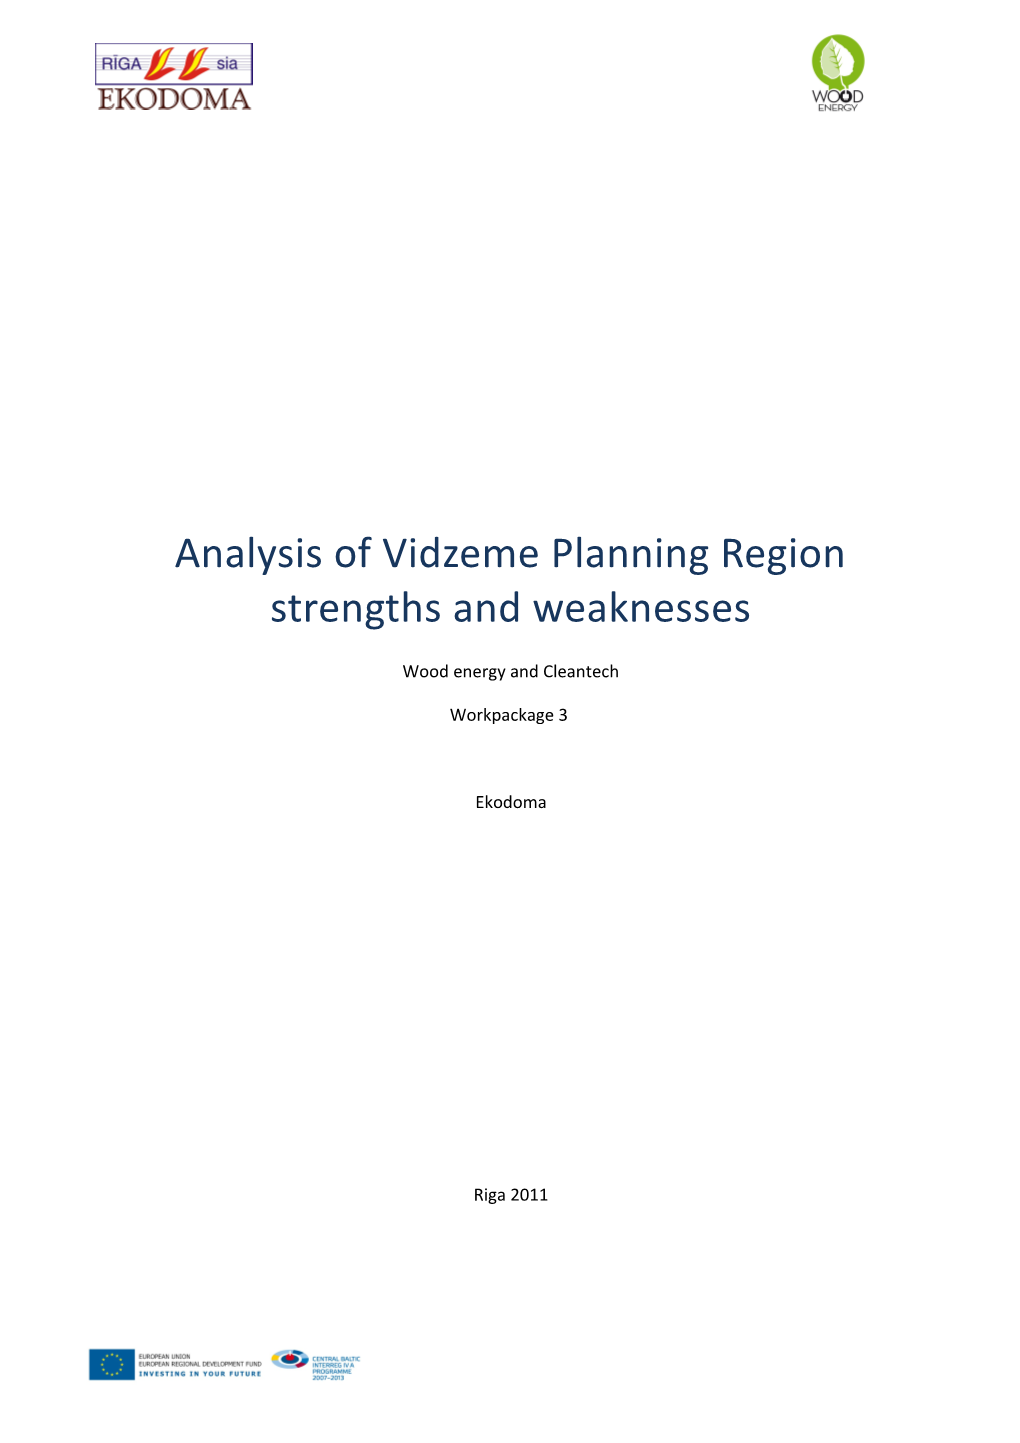 Analysis of Vidzeme Planning Region Strengths and Weaknesses